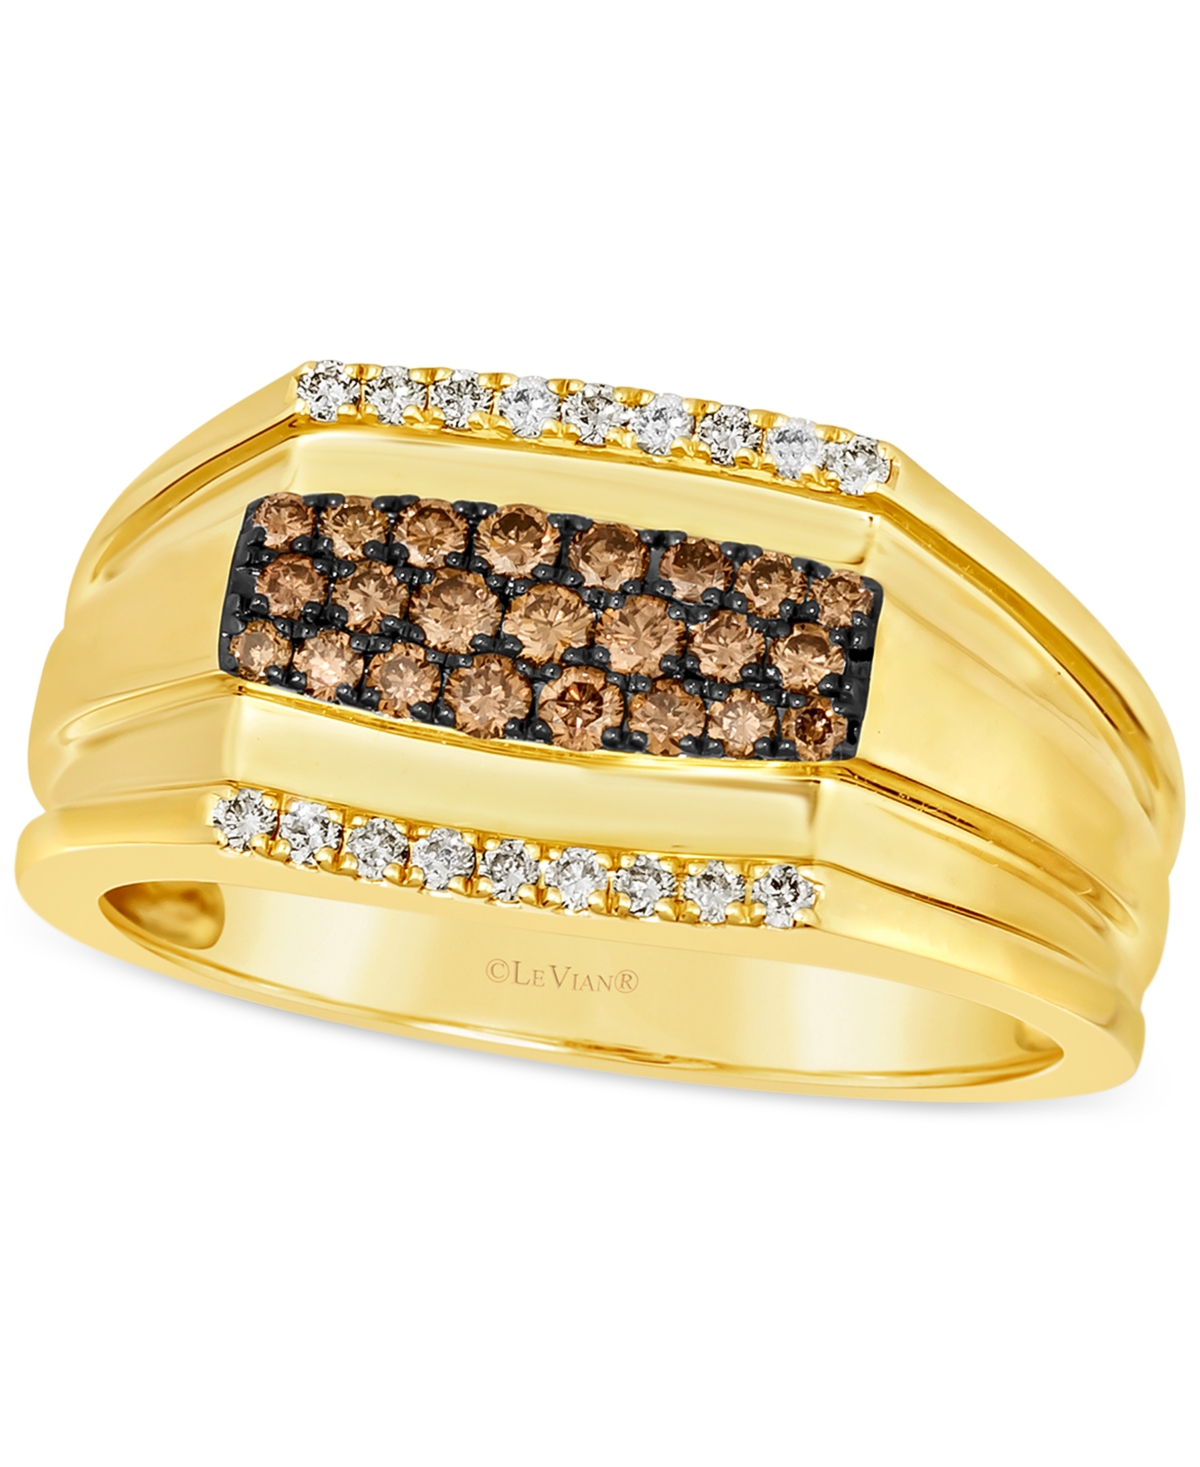 Men's Chocolate Diamond (3/8 ct. t.w.) & Nude Diamond (1/6 ct. t.w.) Cluster Ring in 14k Gold - Yellow Gold